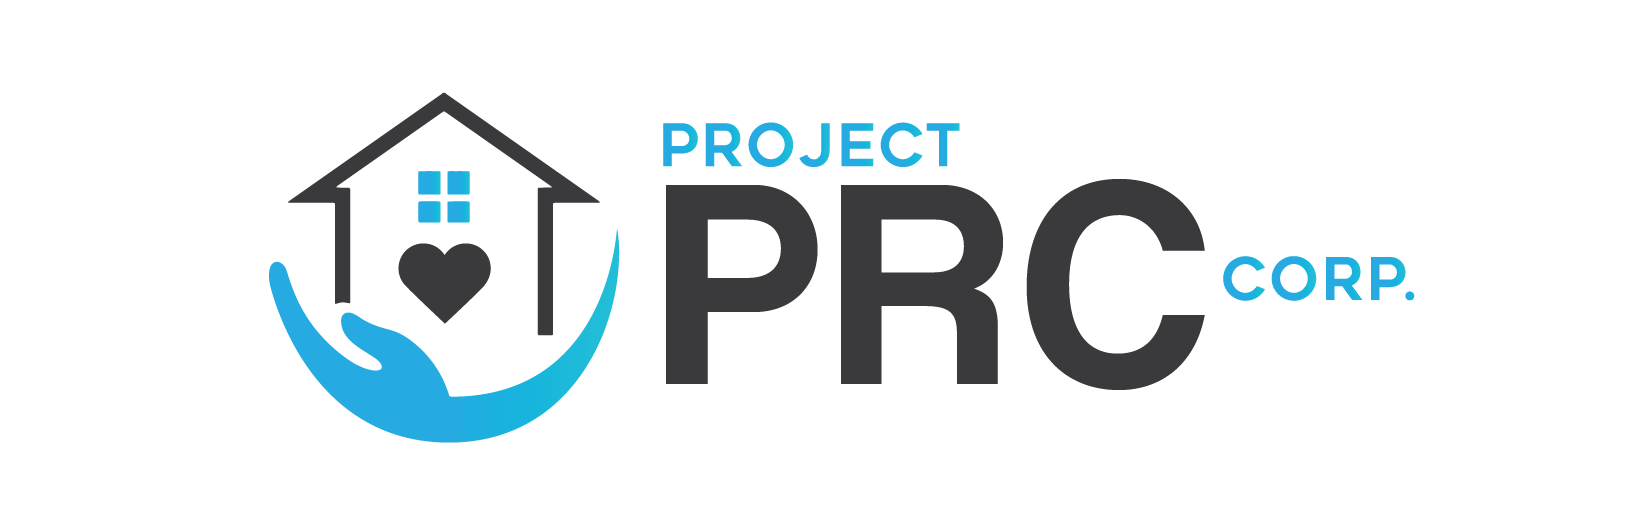 ProjectPRCorp 02